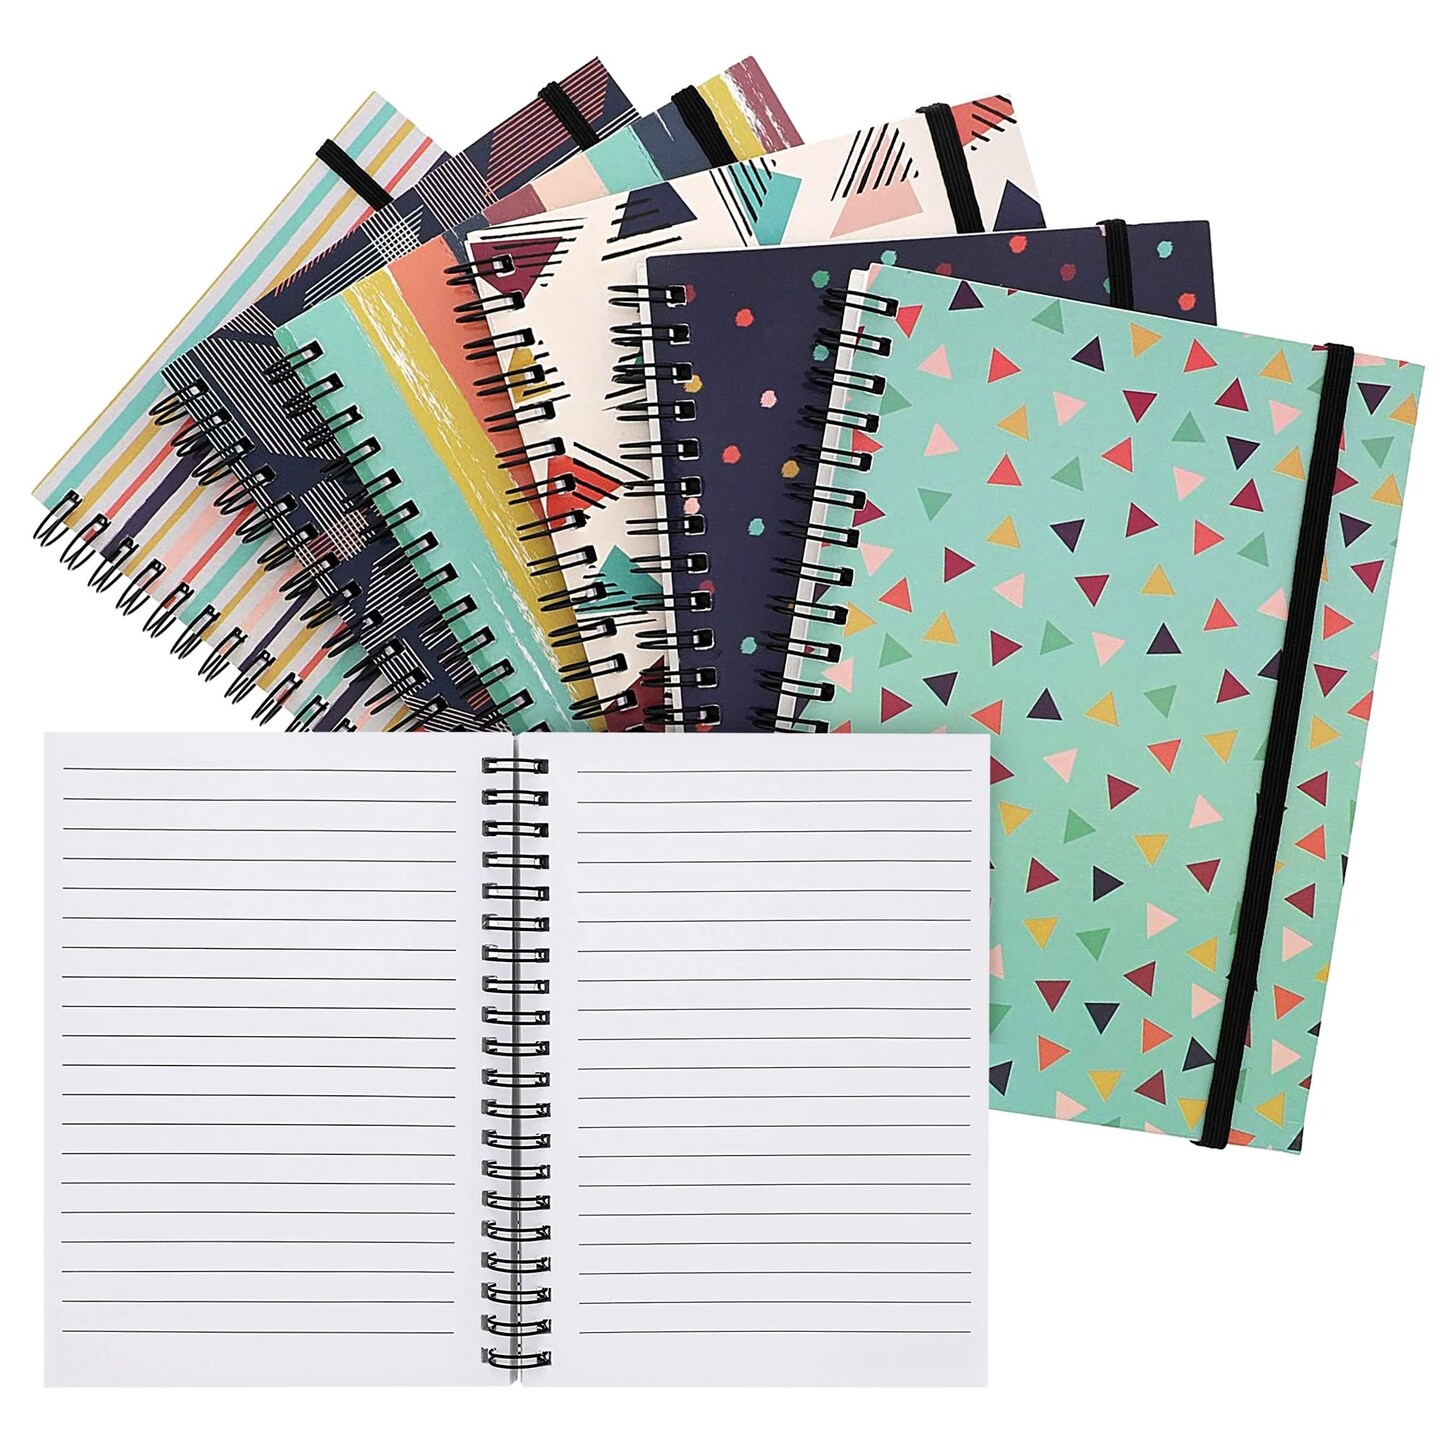 24 Pack Lined Kraft Paper Notebook Bulk Set, Travel Journals with 80 Pages  for Students, Travelers, Kids, Office Supplies (4x8 In)